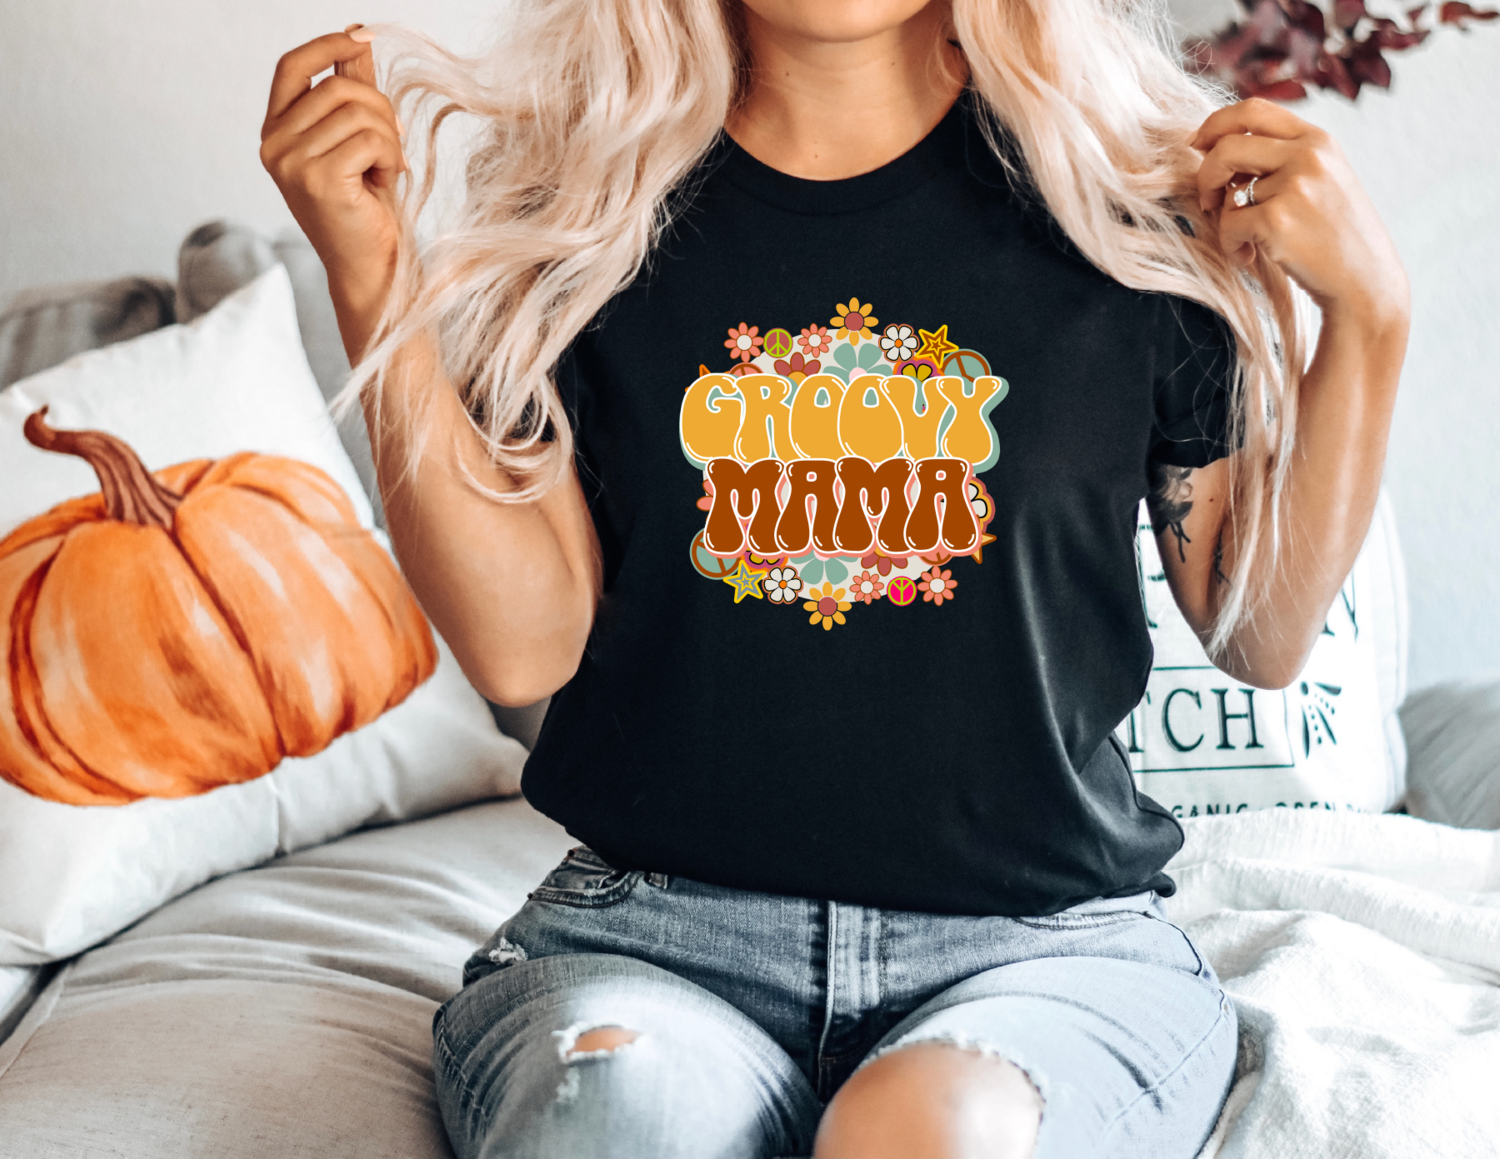 Groovy Mama Shirt, Mother Tshirt, Hippie Mom Shirts, Gift For Mother